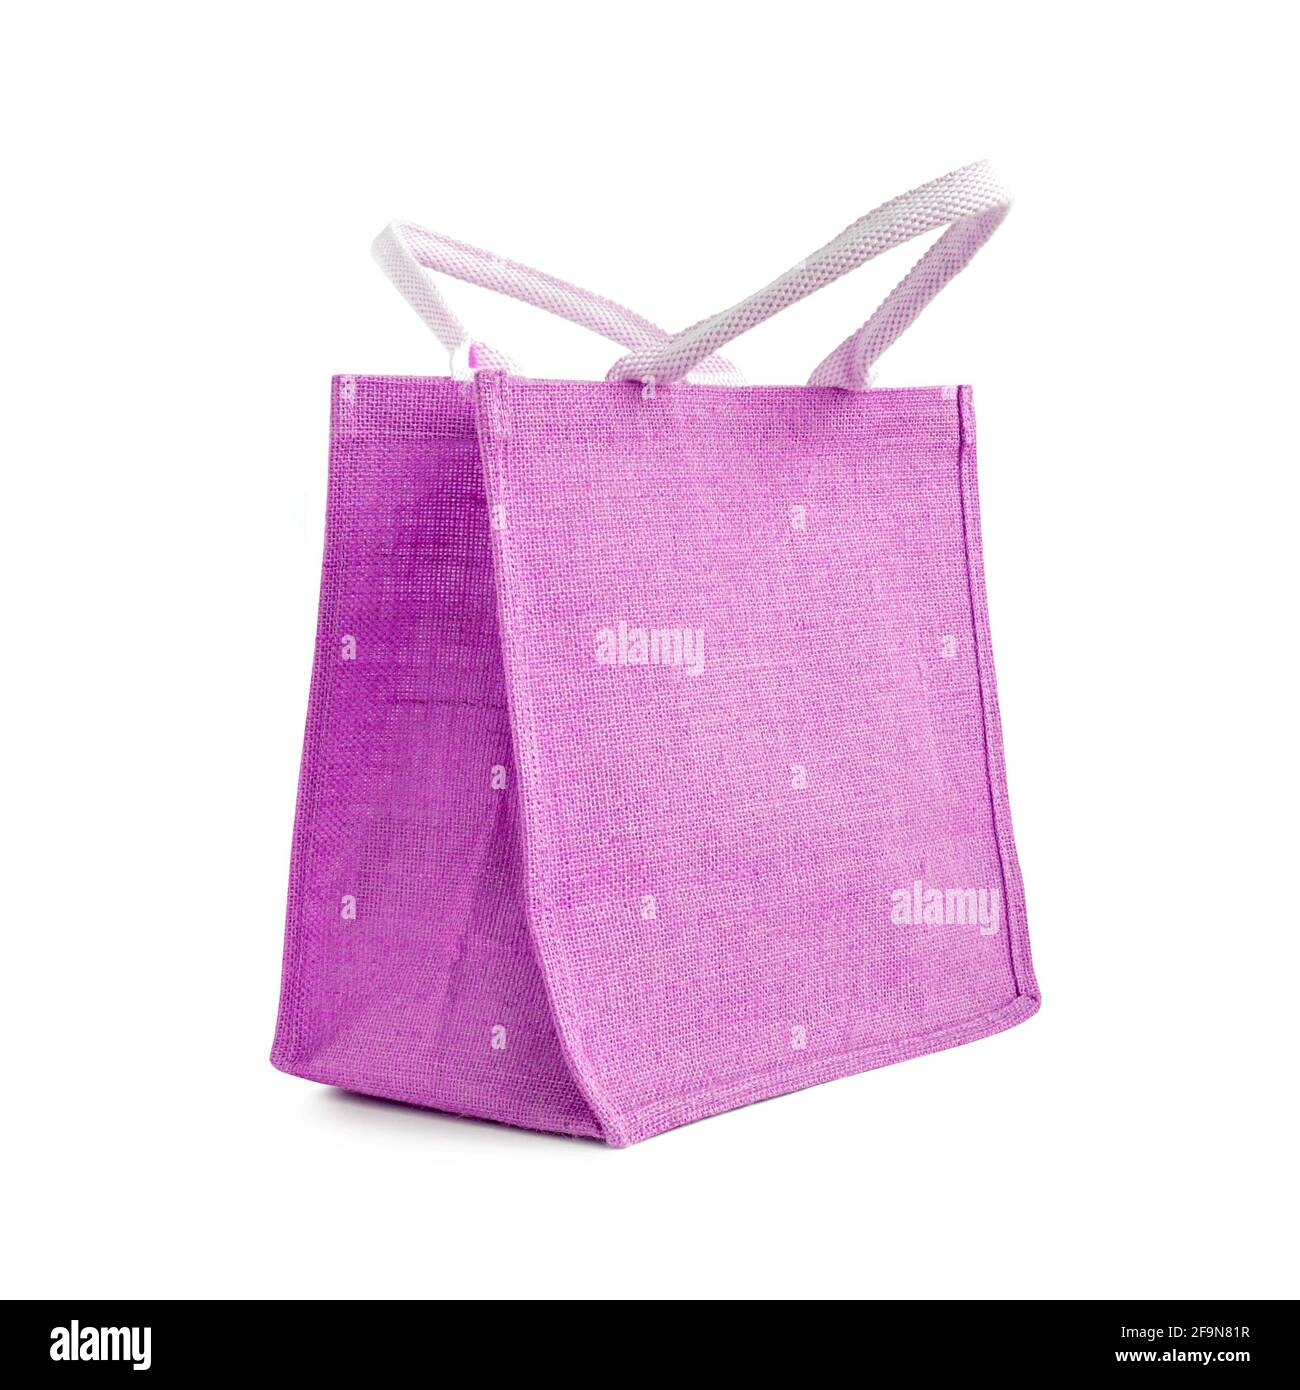 Hessian or jute bag - reusable purple shopping bag with loop handles - isolated Stock Photo